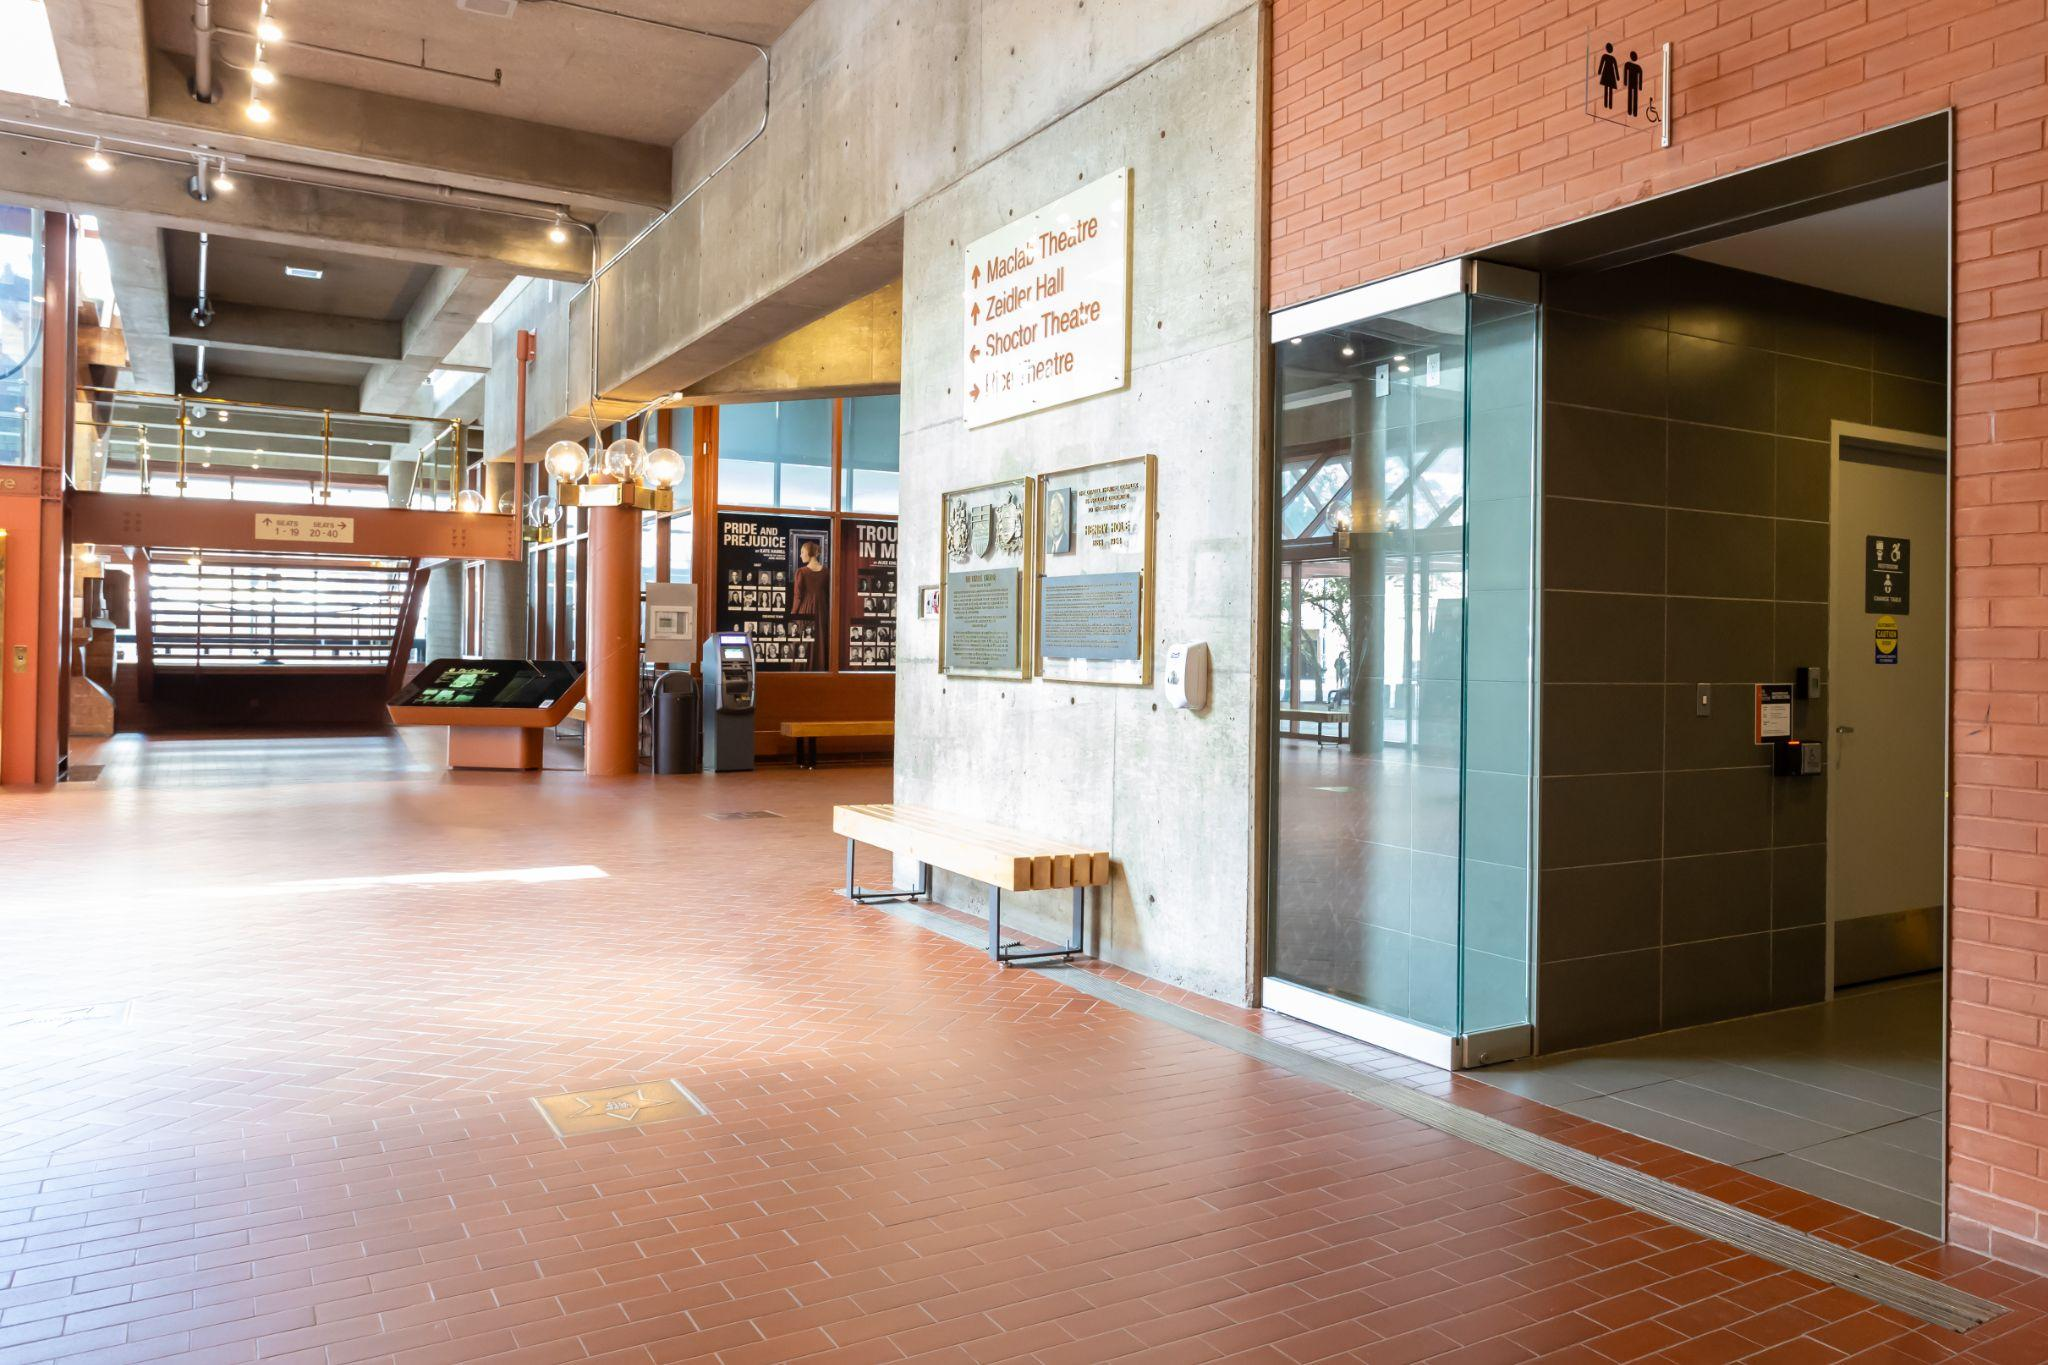 View of the main floor washroom entrances by the Shoctor Alley (south) entrance.